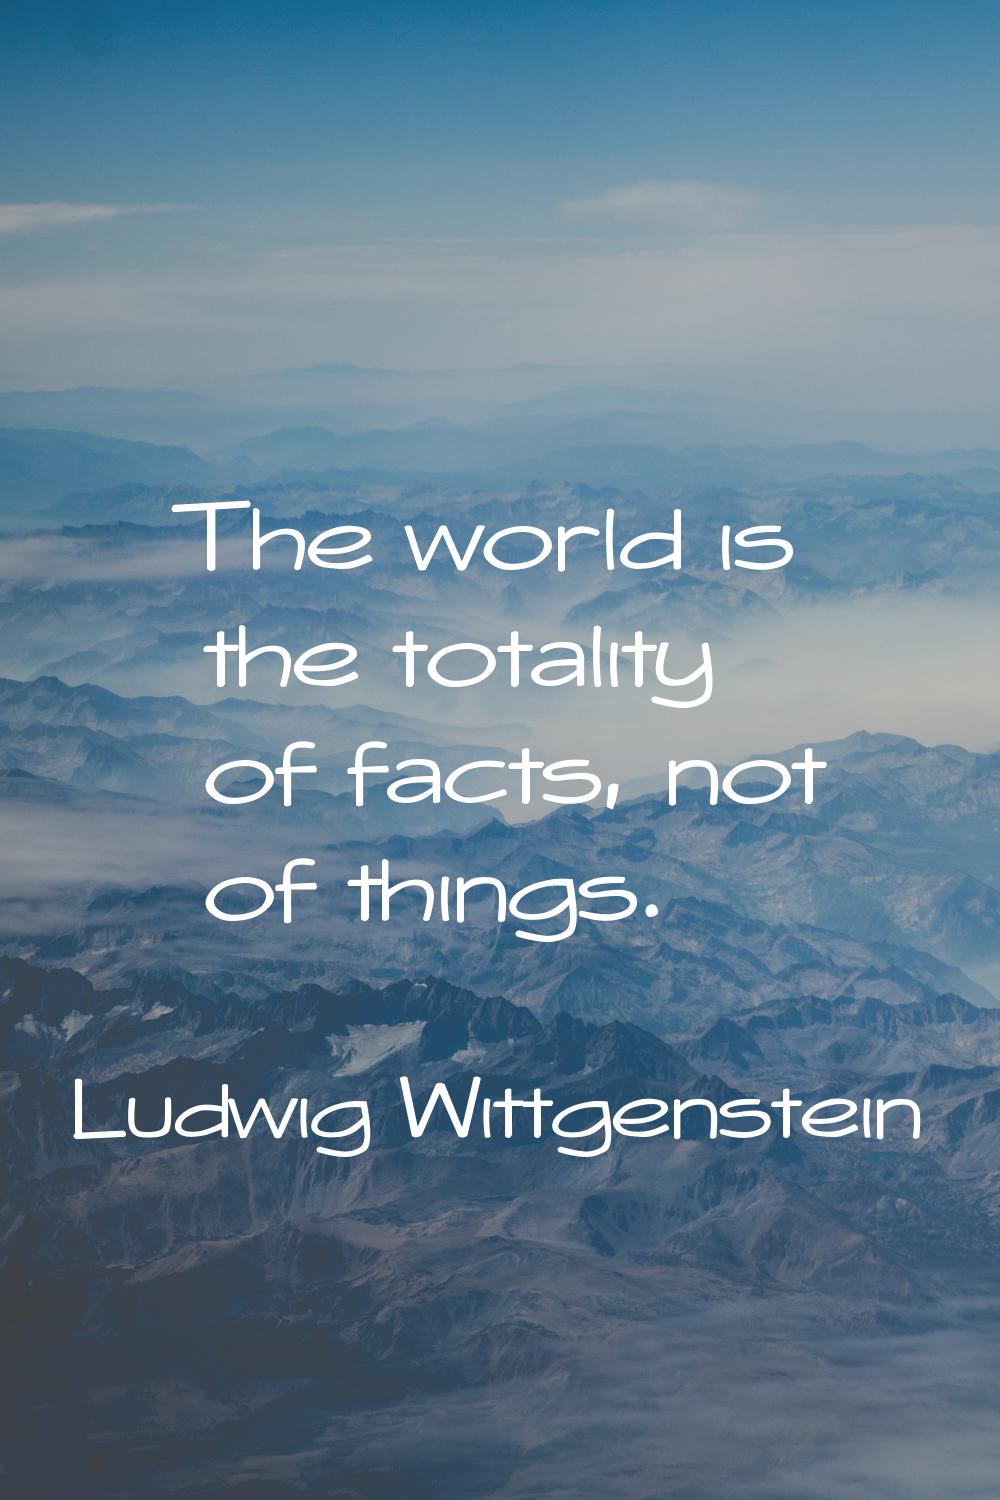 The world is the totality of facts, not of things.